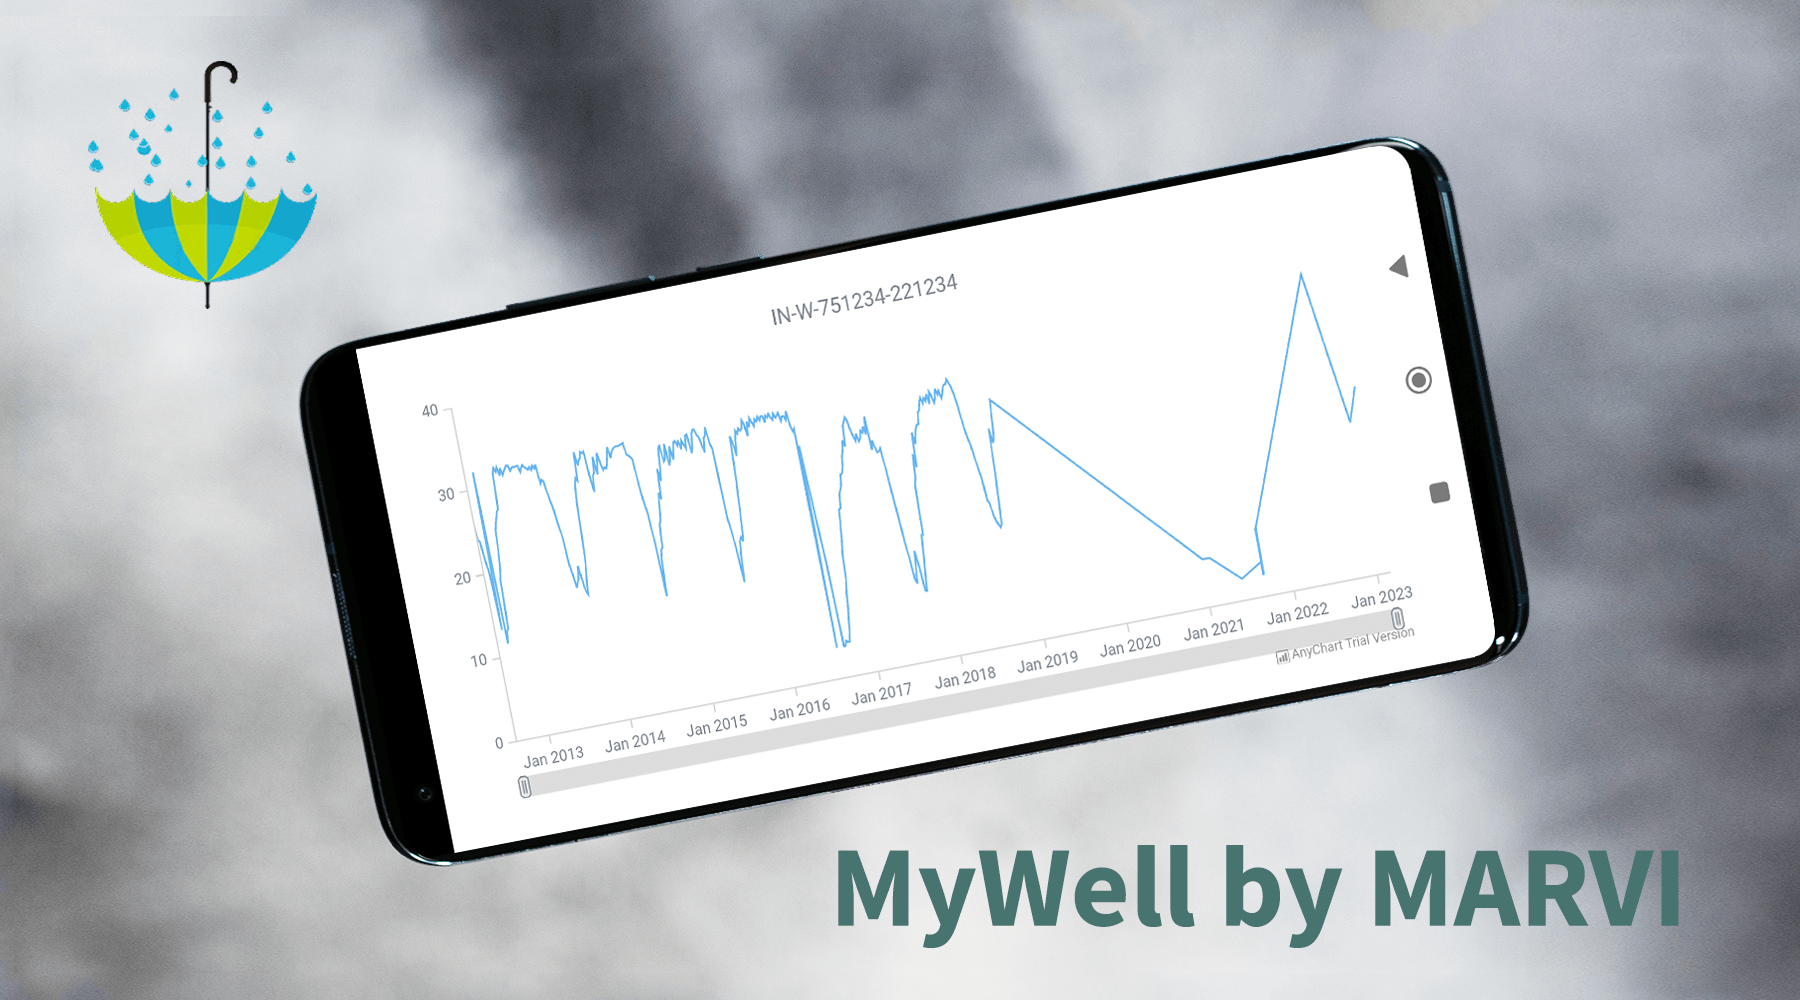 MARVI Project Using AnyChart Android Charts to Visualize Groundwater Data in MyWell App